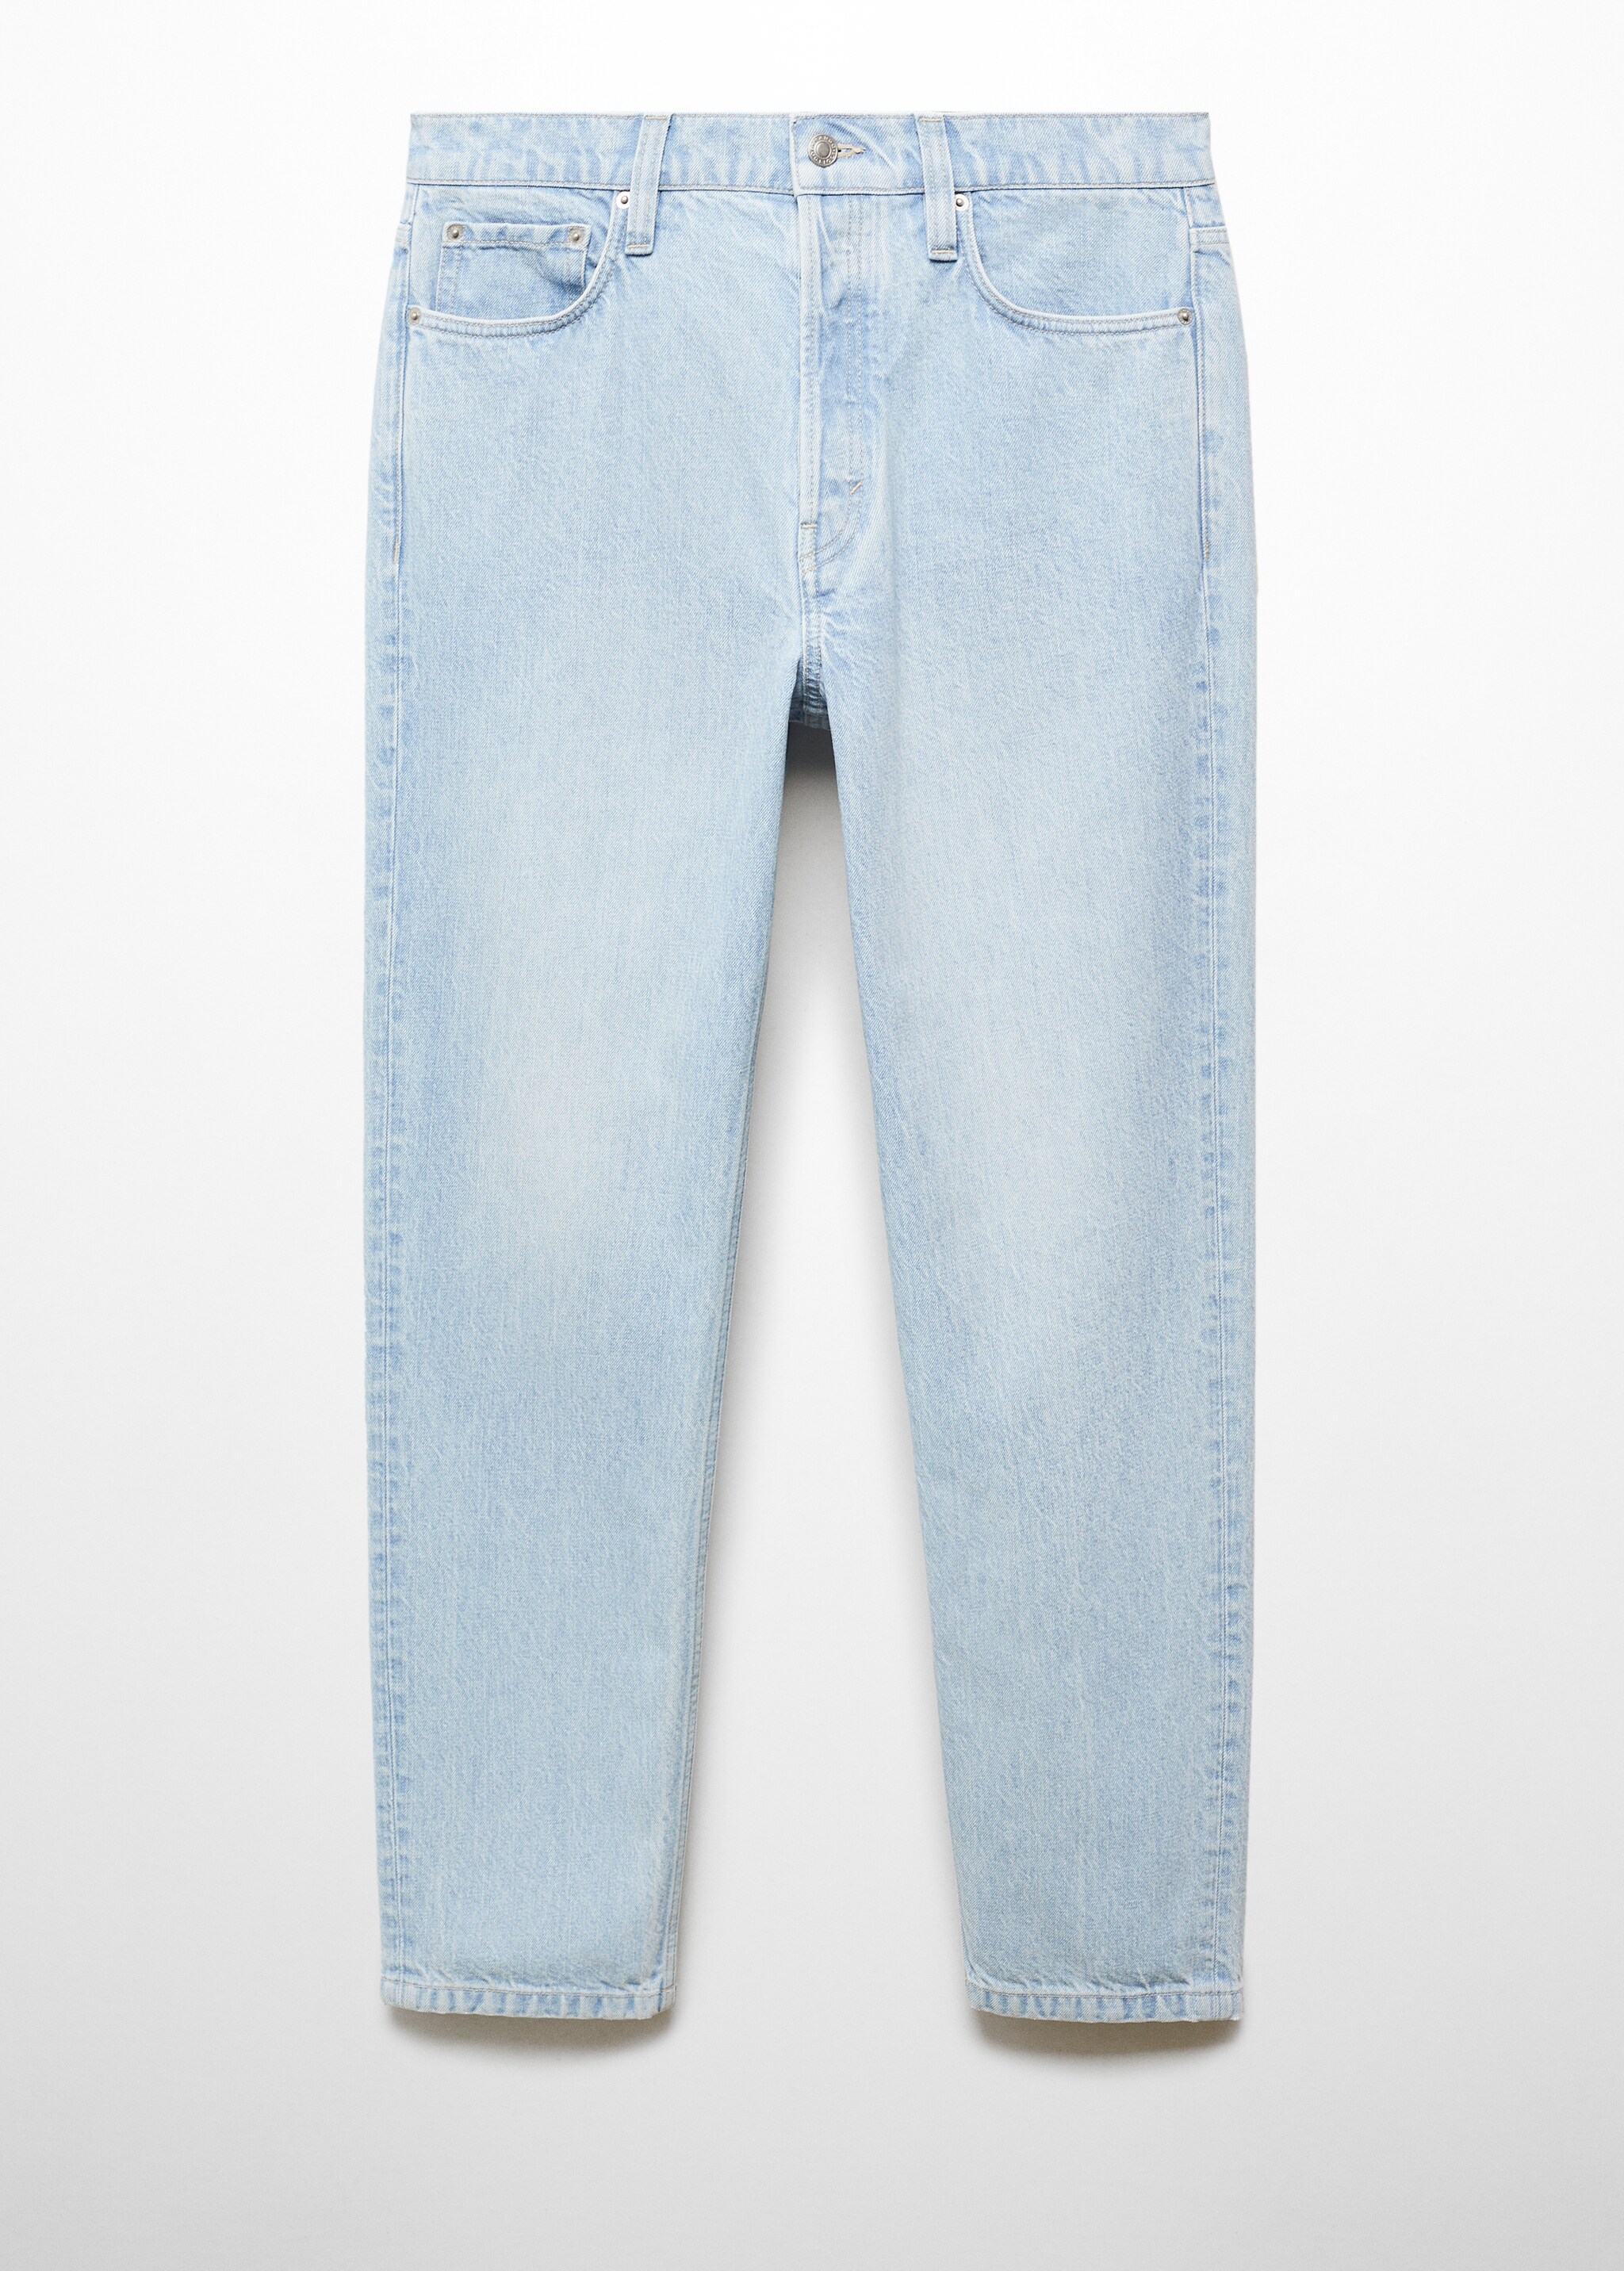 Regular fit light washed jeans - Article without model